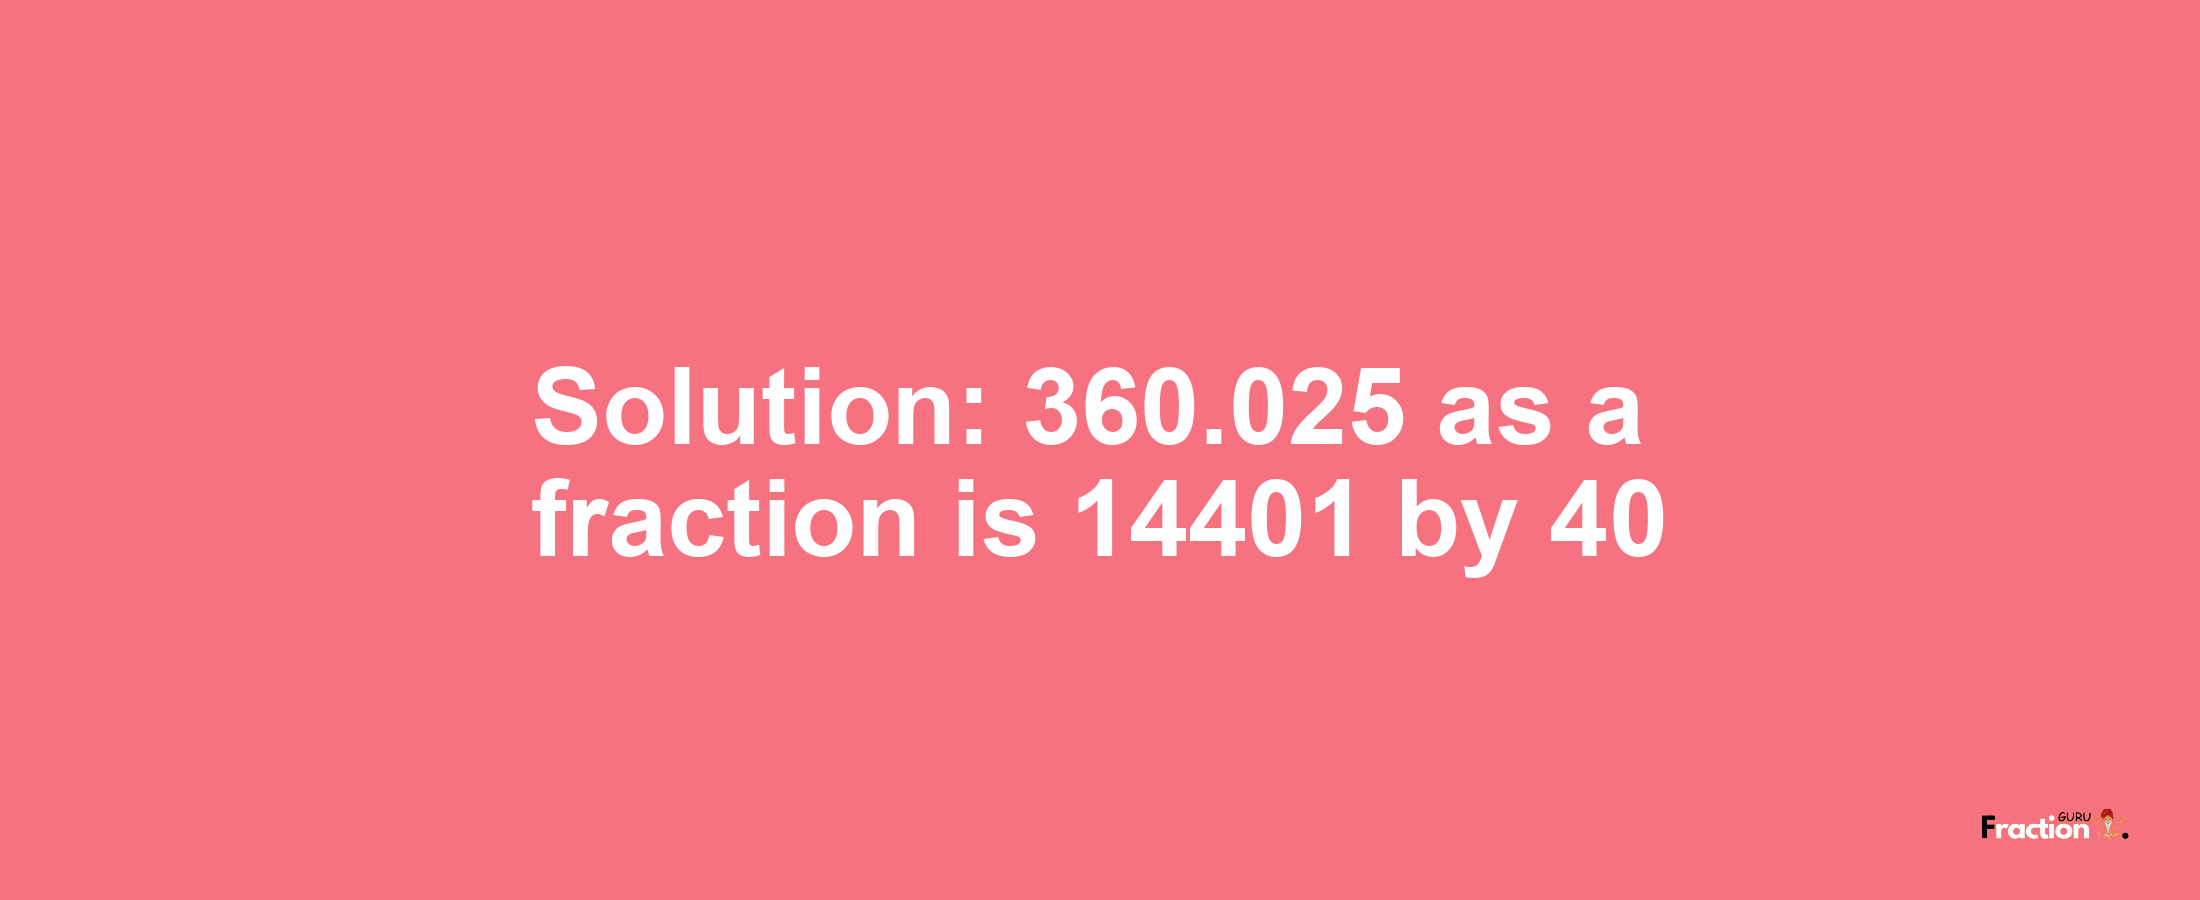 Solution:360.025 as a fraction is 14401/40